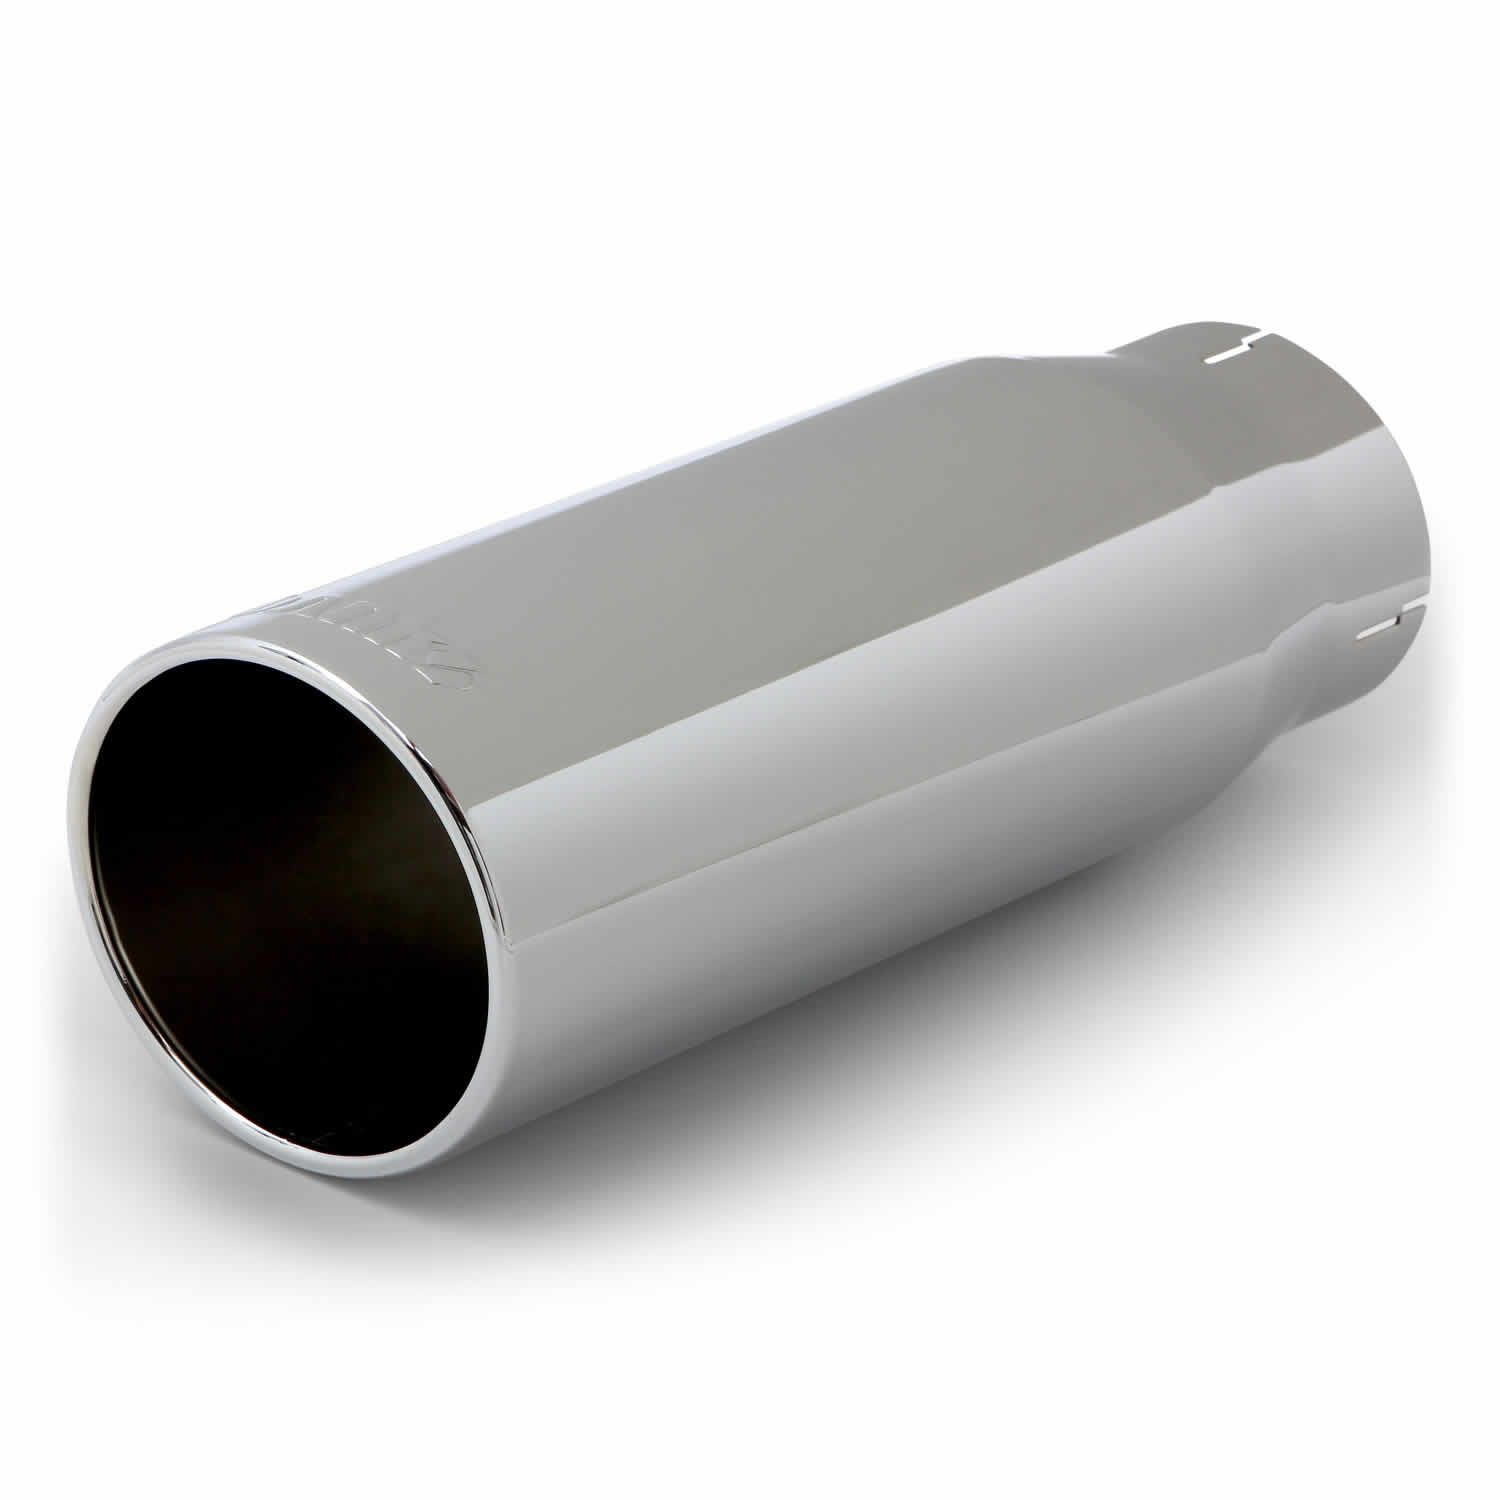 Tailpipe Tip Kit Round Straight Cut Chrome 3.5 Inch Tube 4.38 Inch X 12 ...